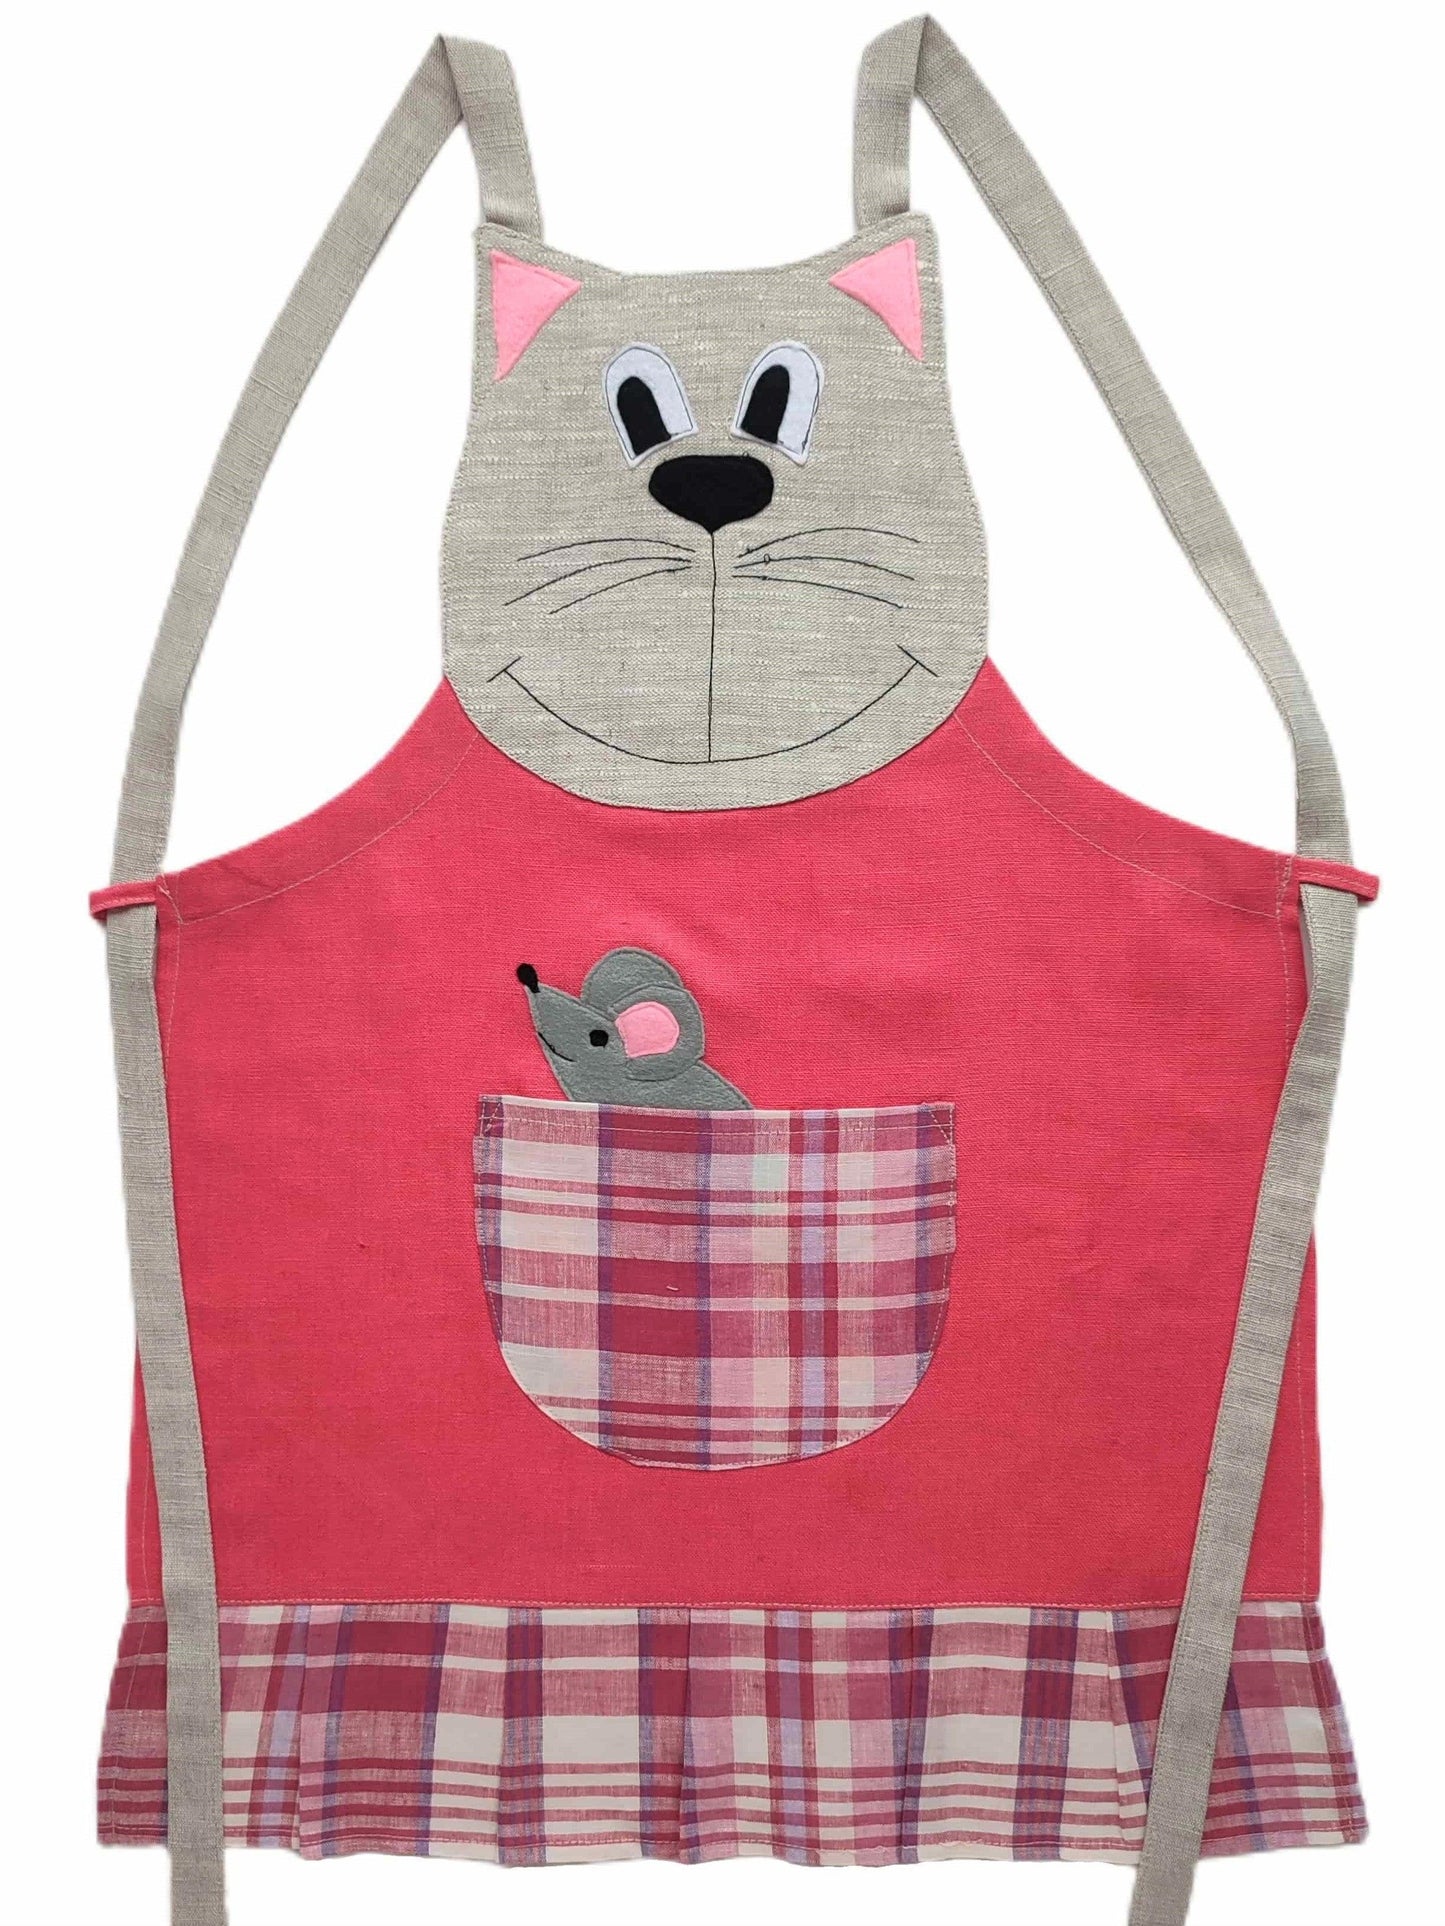 Children's apron (4-8 years old) ANNA - Linen4me